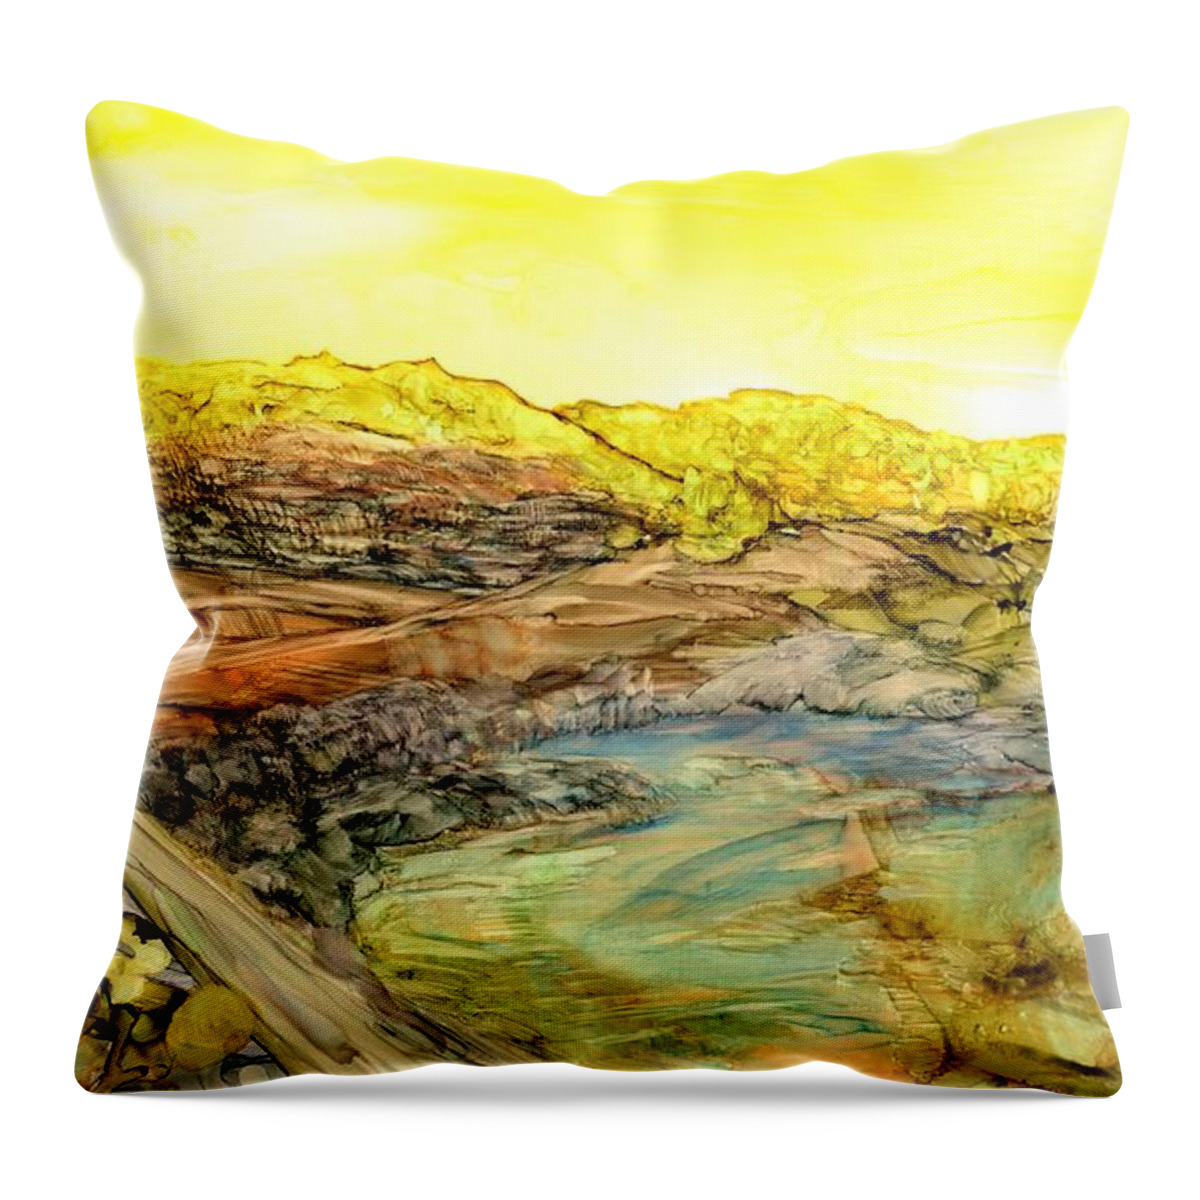 Bright Throw Pillow featuring the painting Washout by Angela Marinari